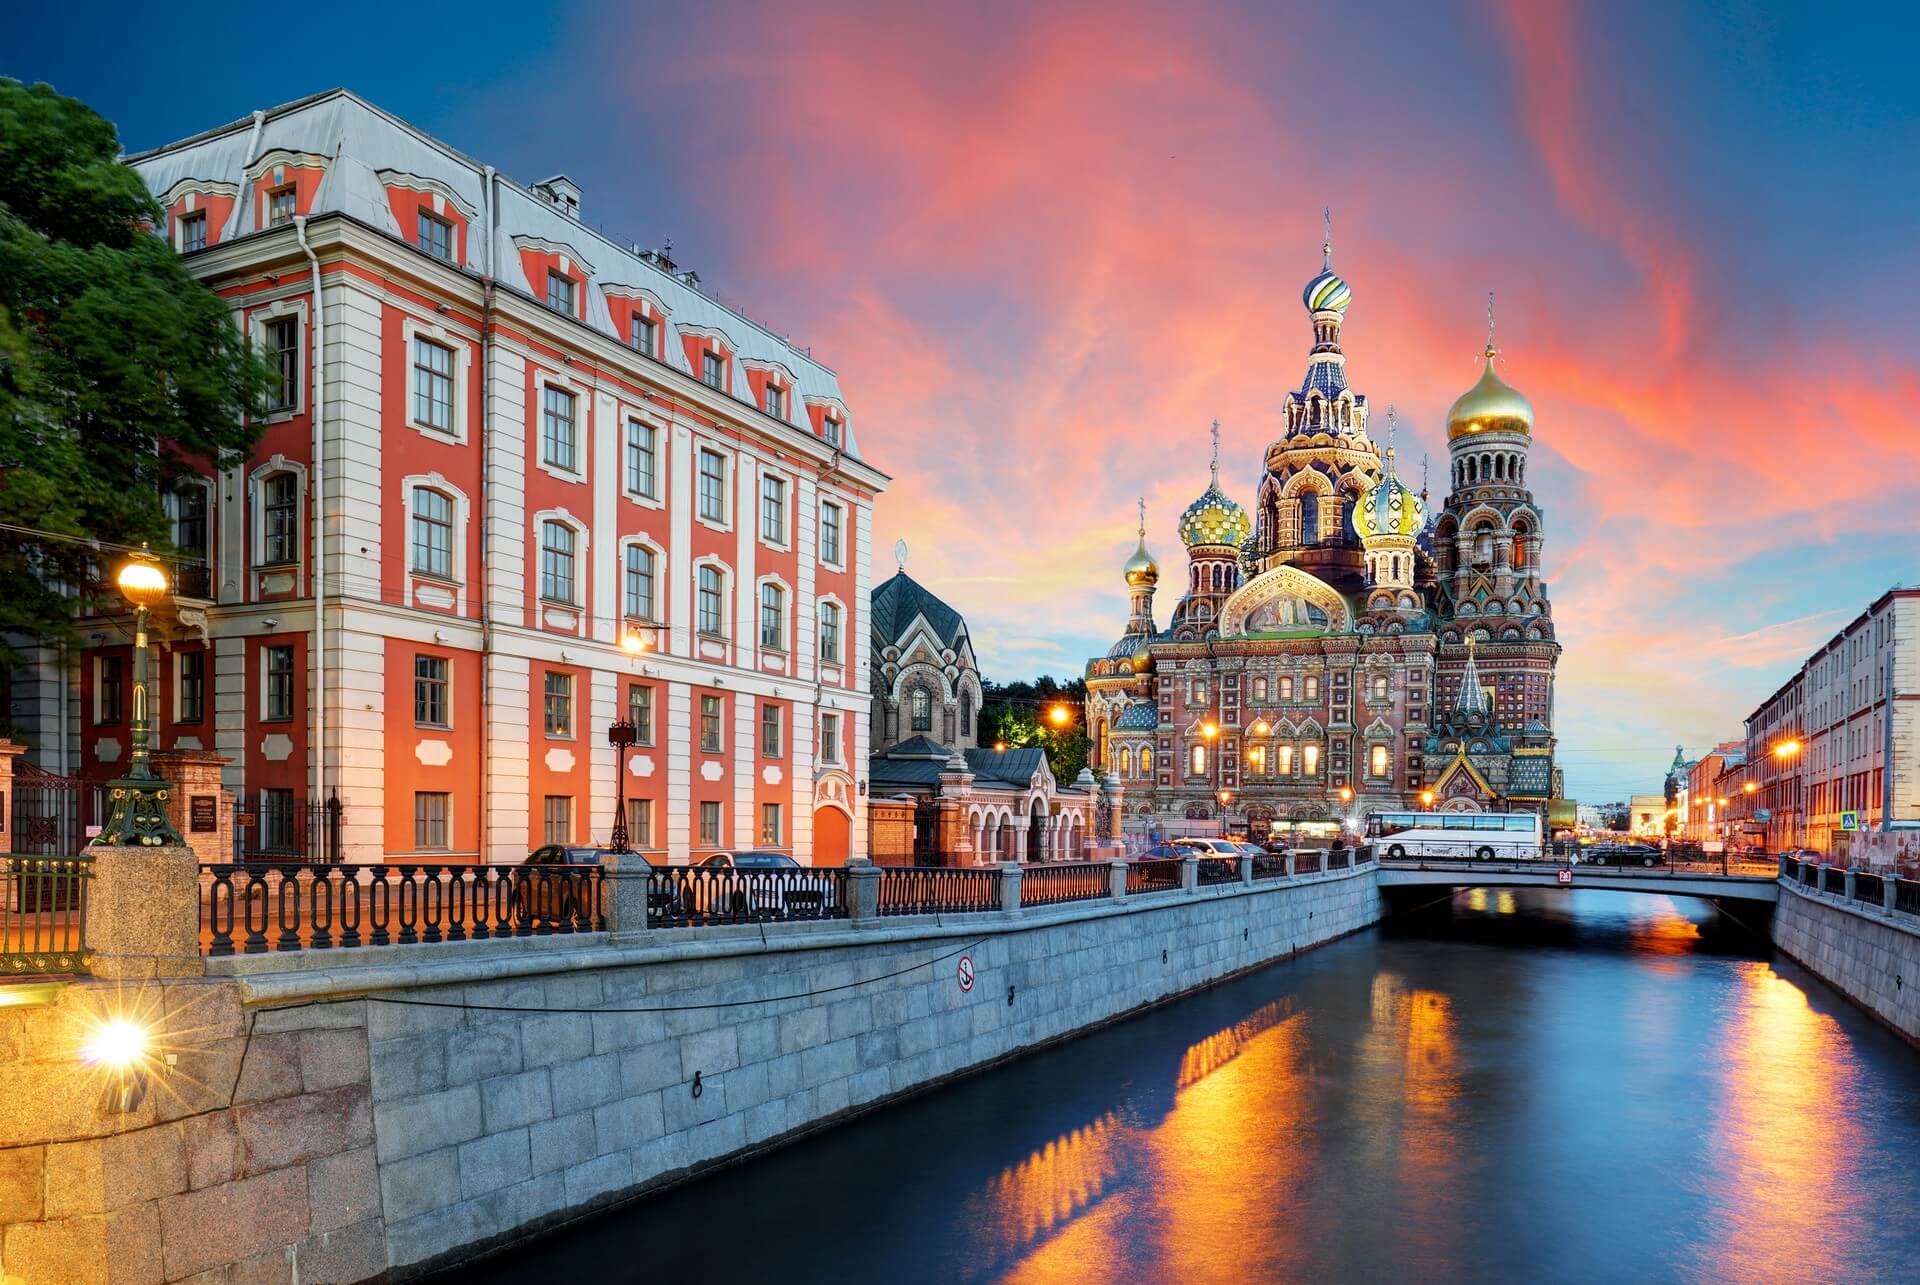 St. Petersburg - Church of the Saviour on Spilled Blood, Russia
